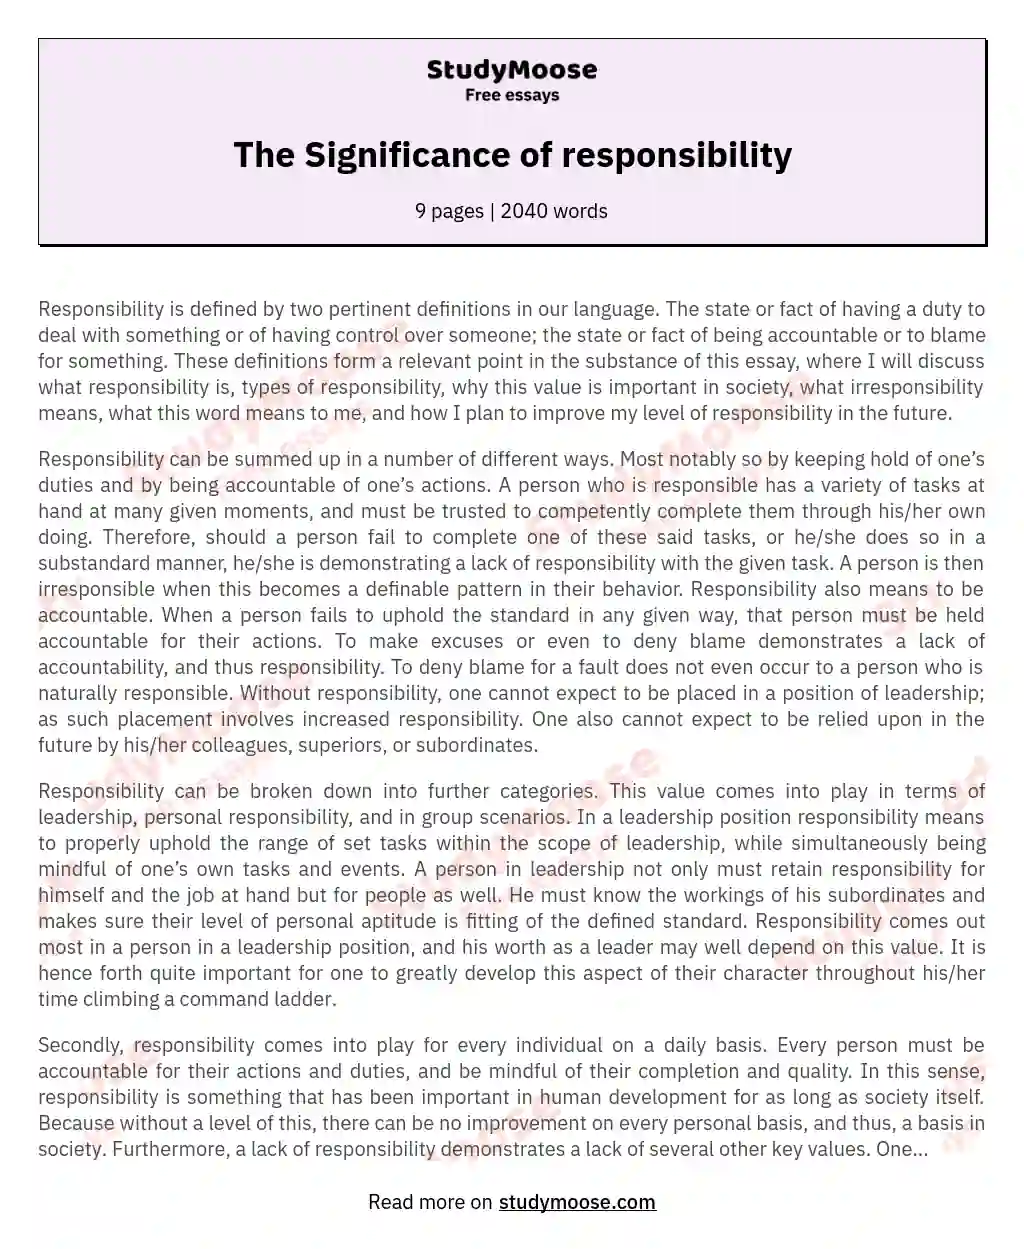 The Significance of responsibility essay